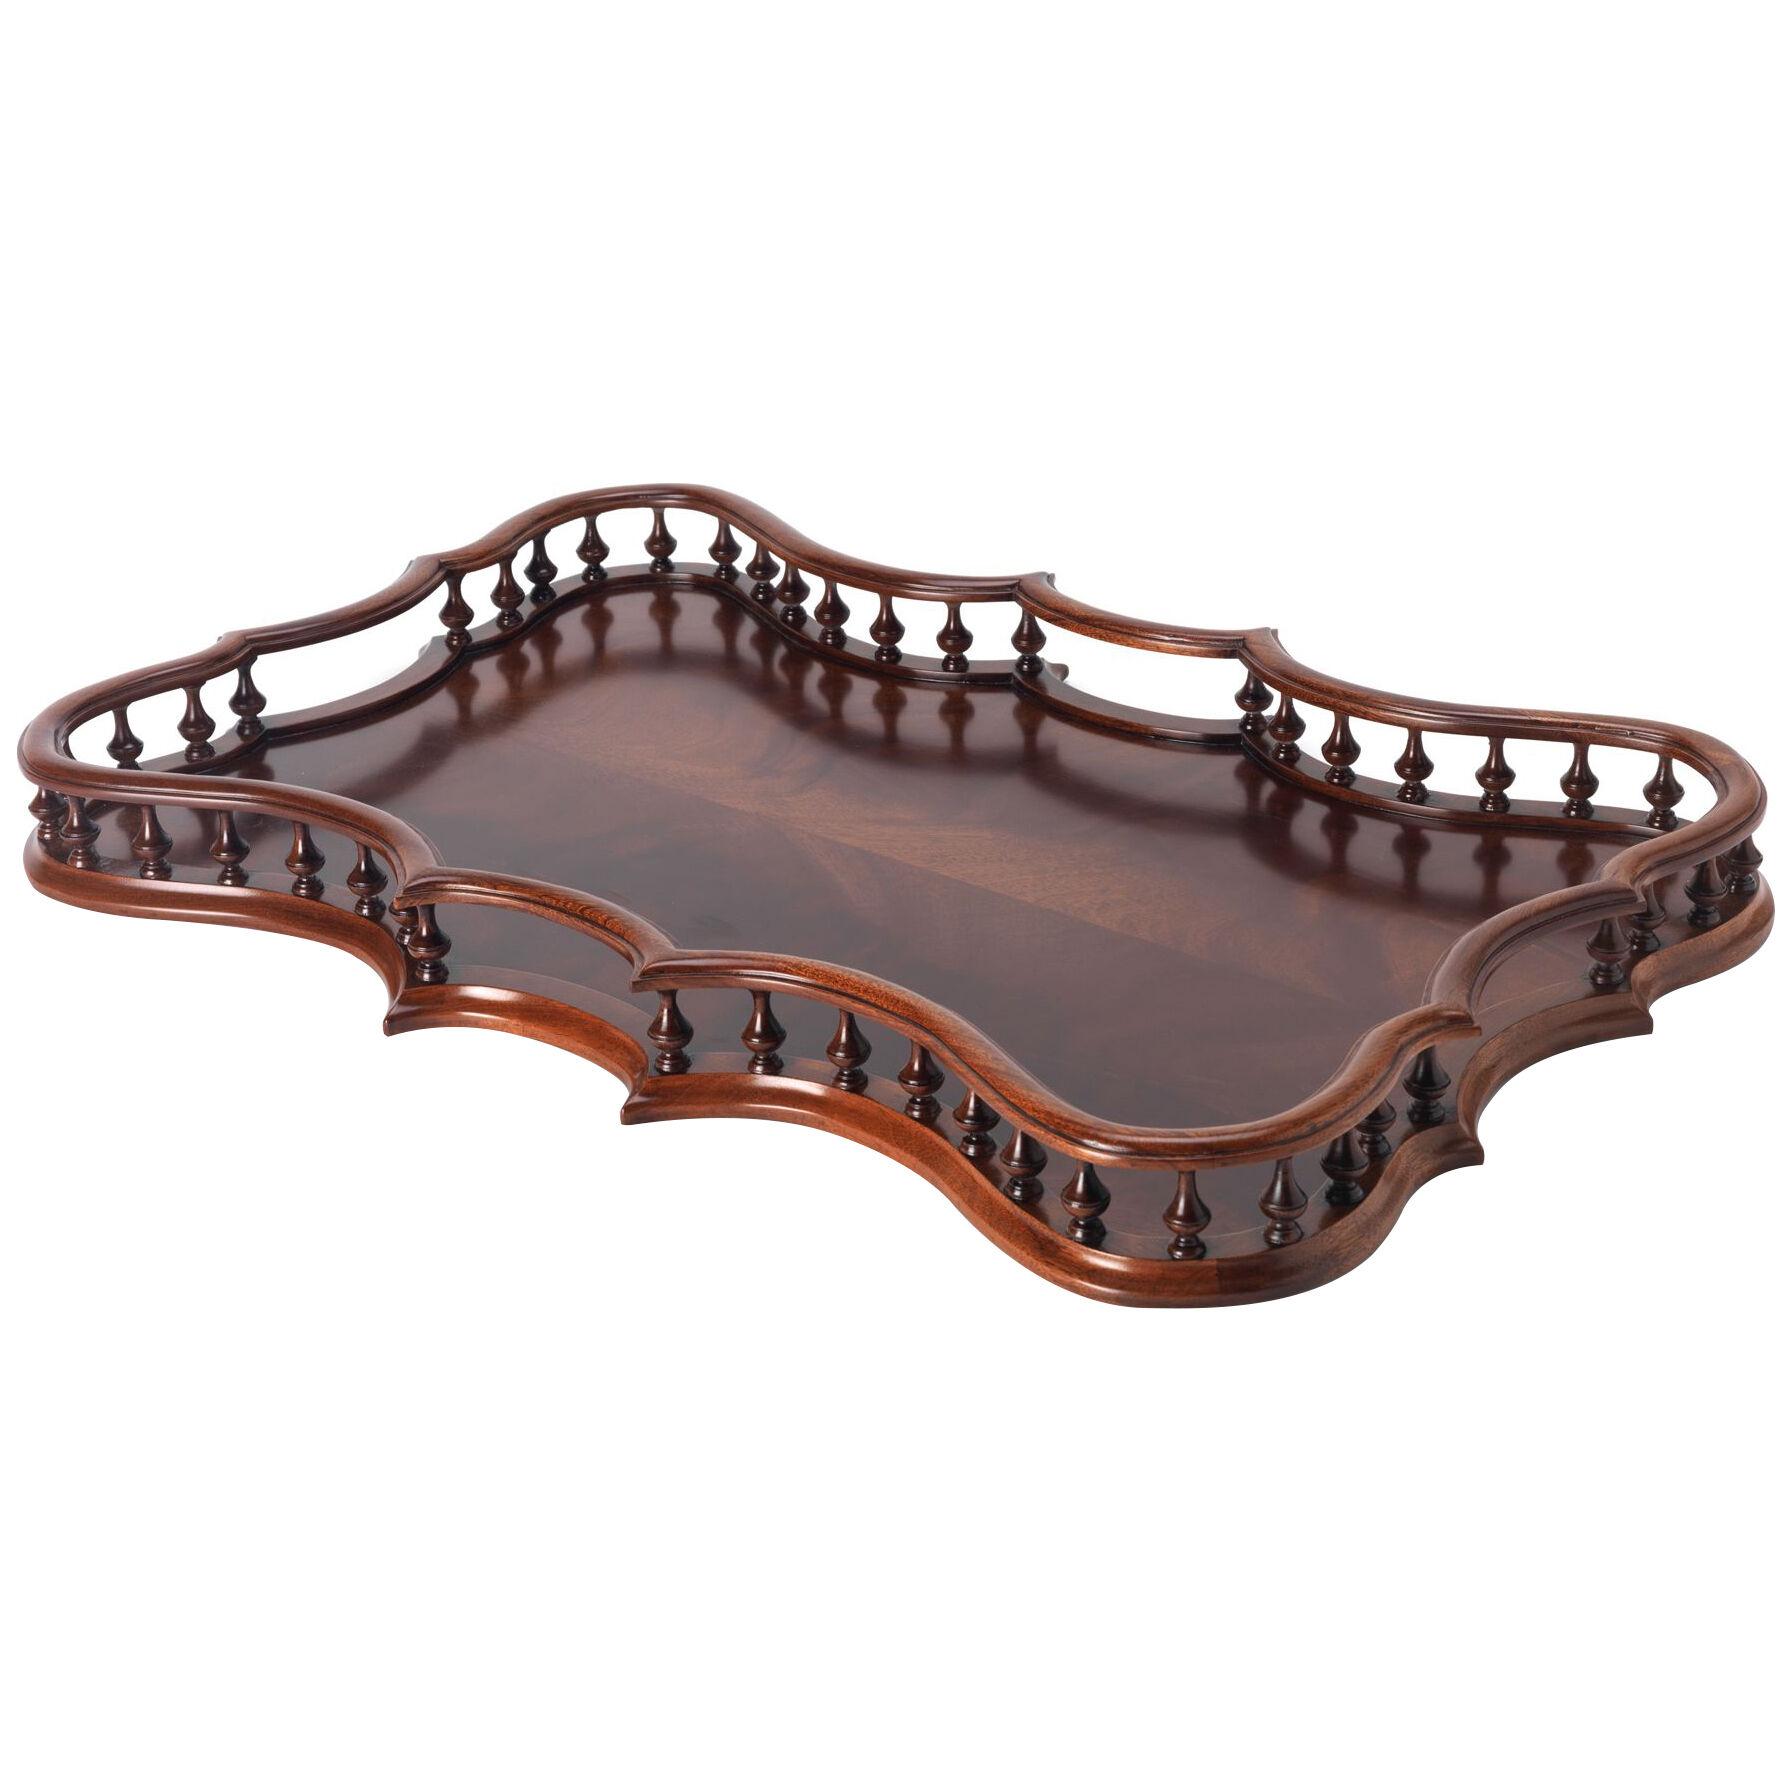 The Chippendale Tray